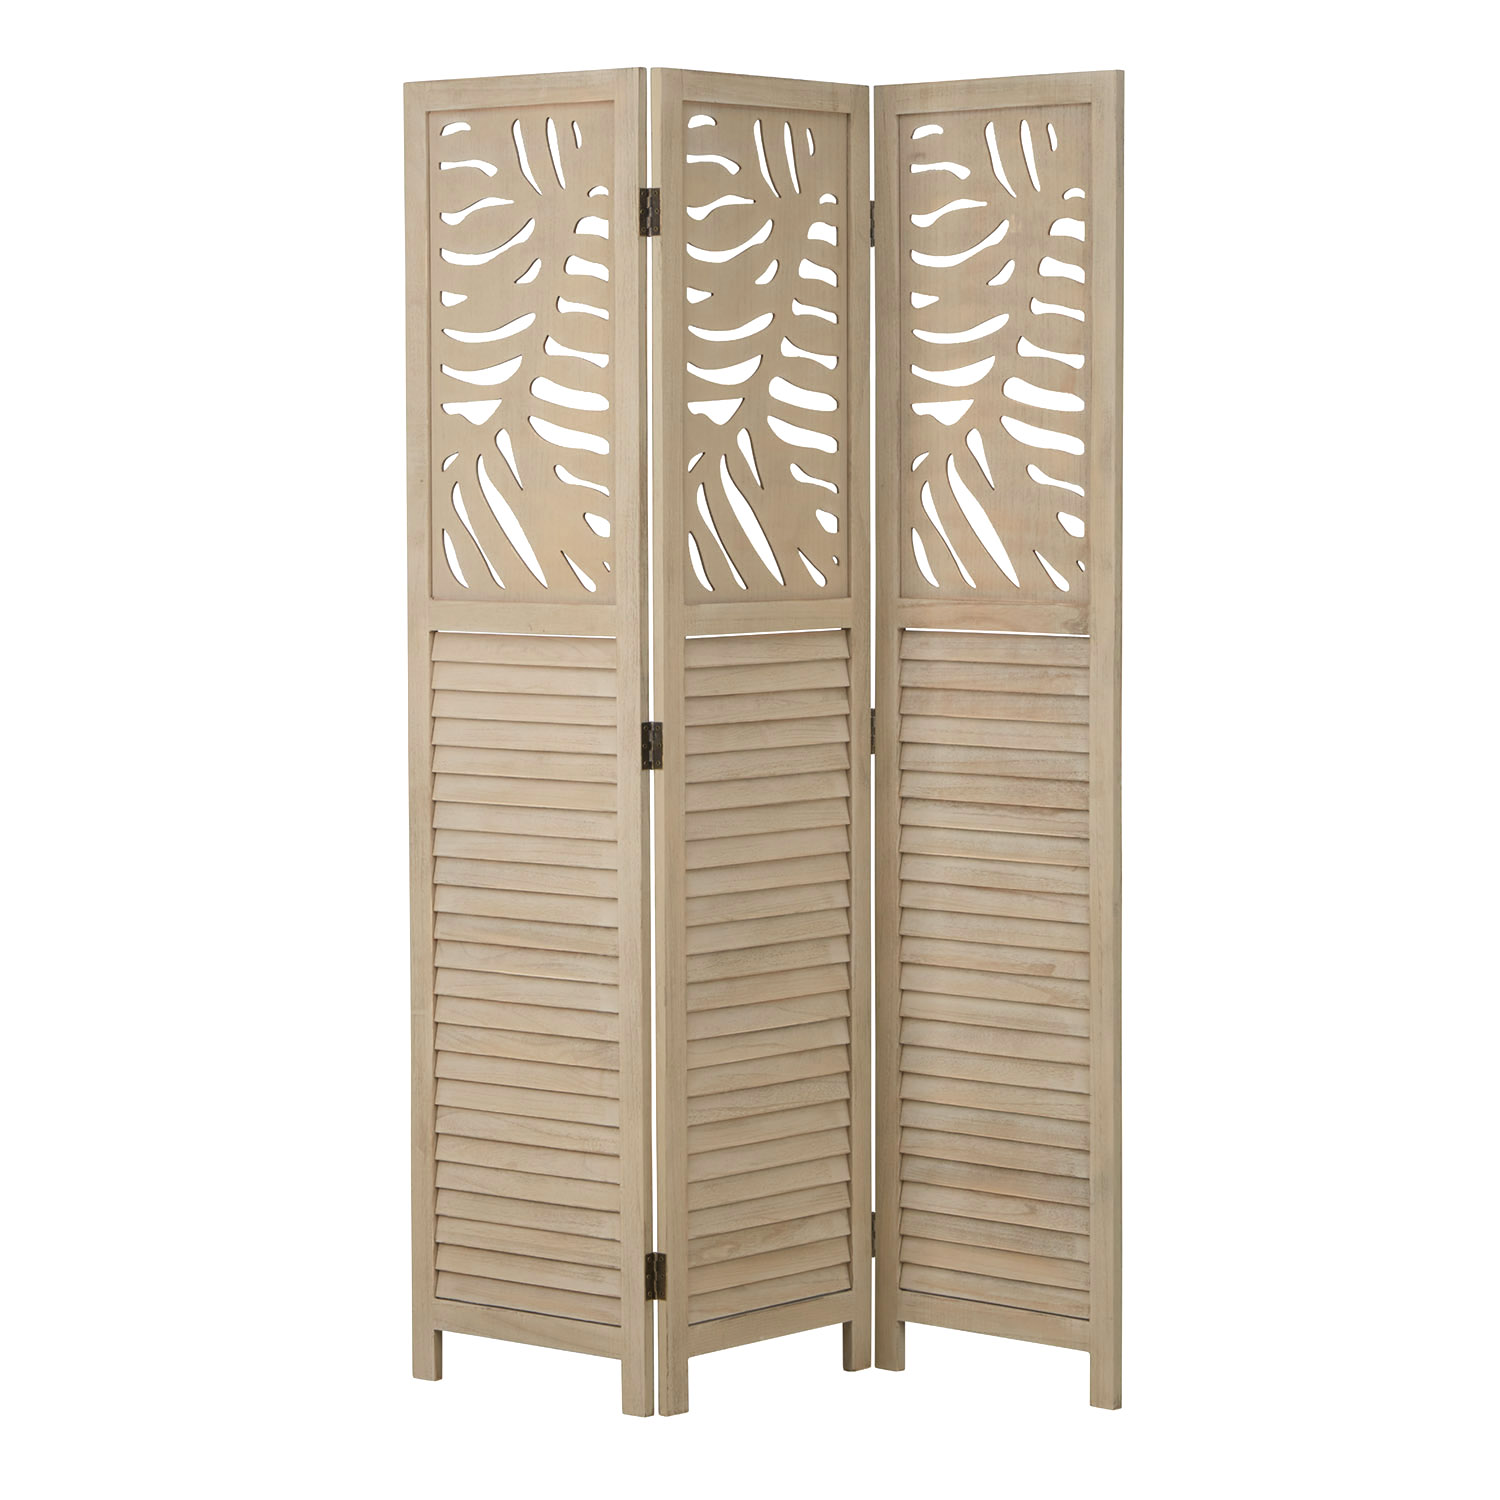 Room Divider Privacy Screen Paravent 3 Panel Foldable Wooden Screen Sand Beige